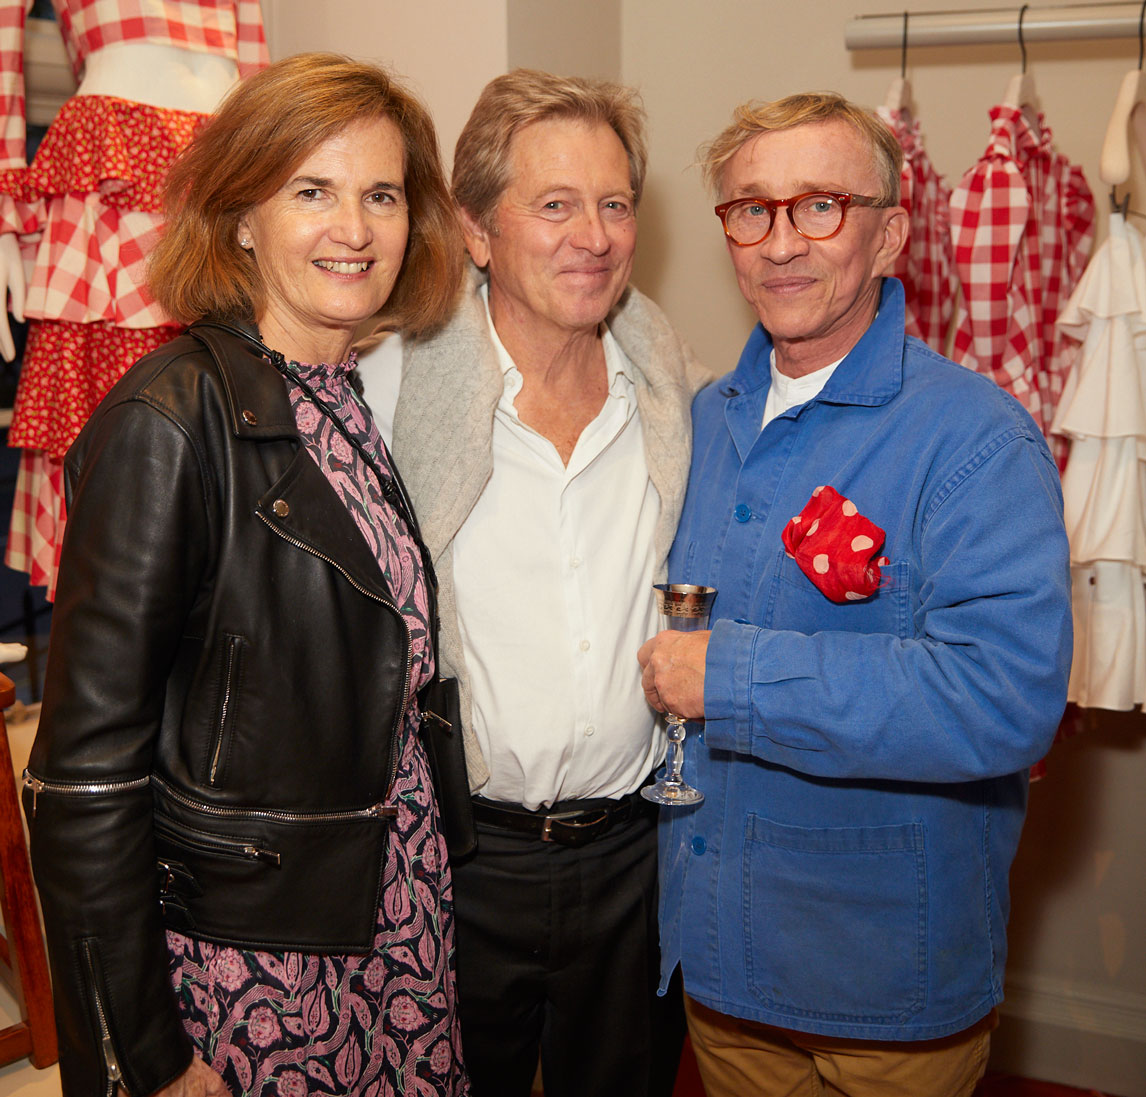 Catherine and John Pawson and Jasper Conran at the Interiors launch at MATCHESFASHION.COM in London